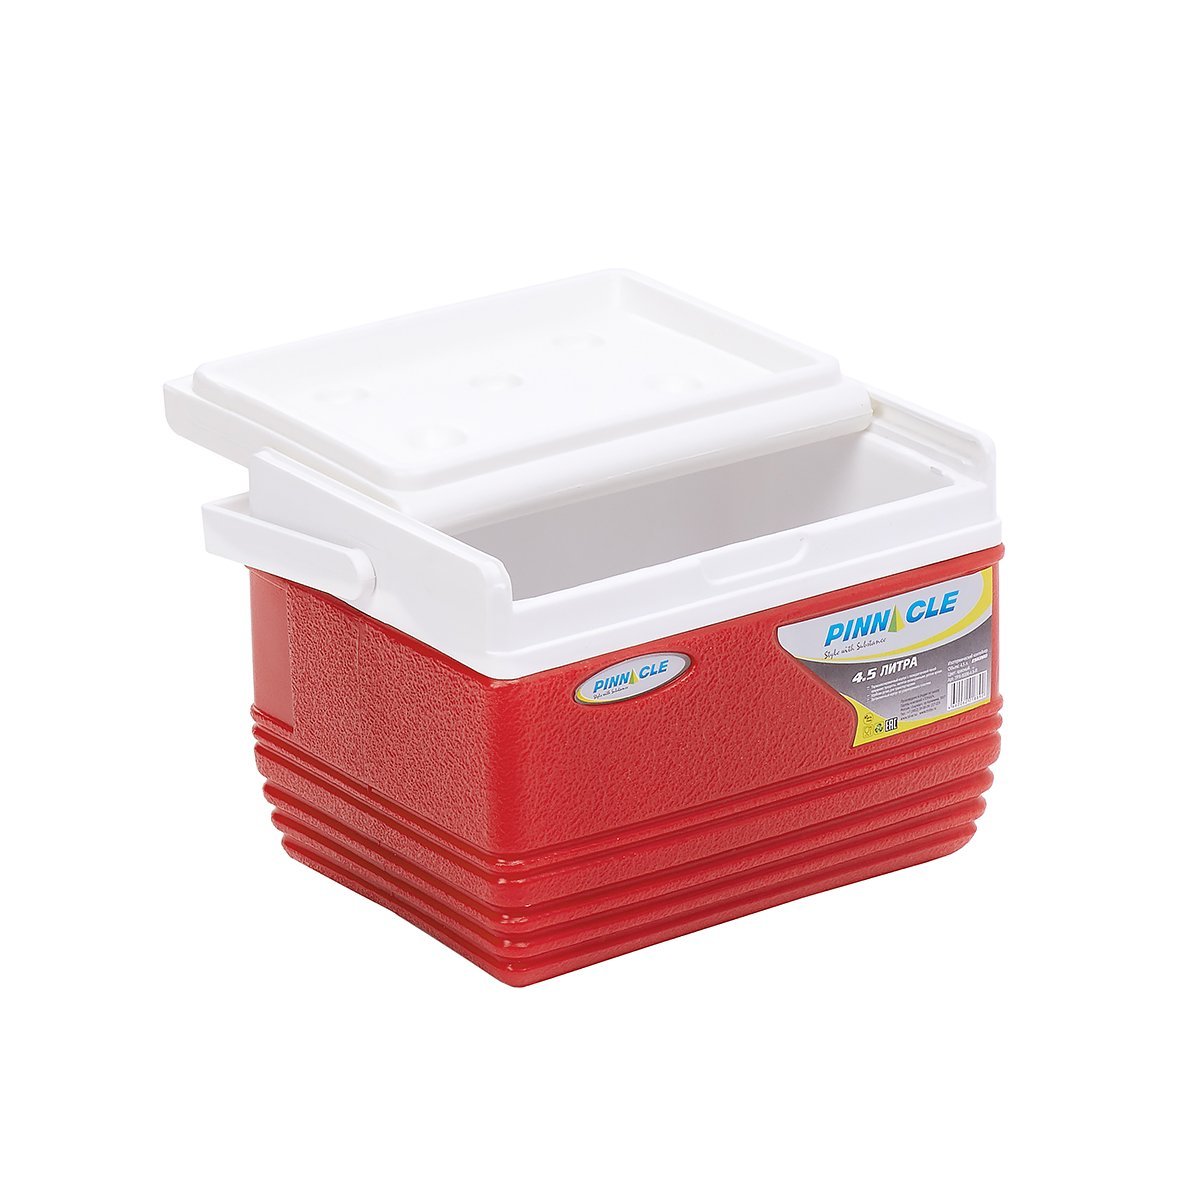 Eskimo Portable Hard-Sided Ice Chest for Camping, 4 qt, Red with a lid half opened